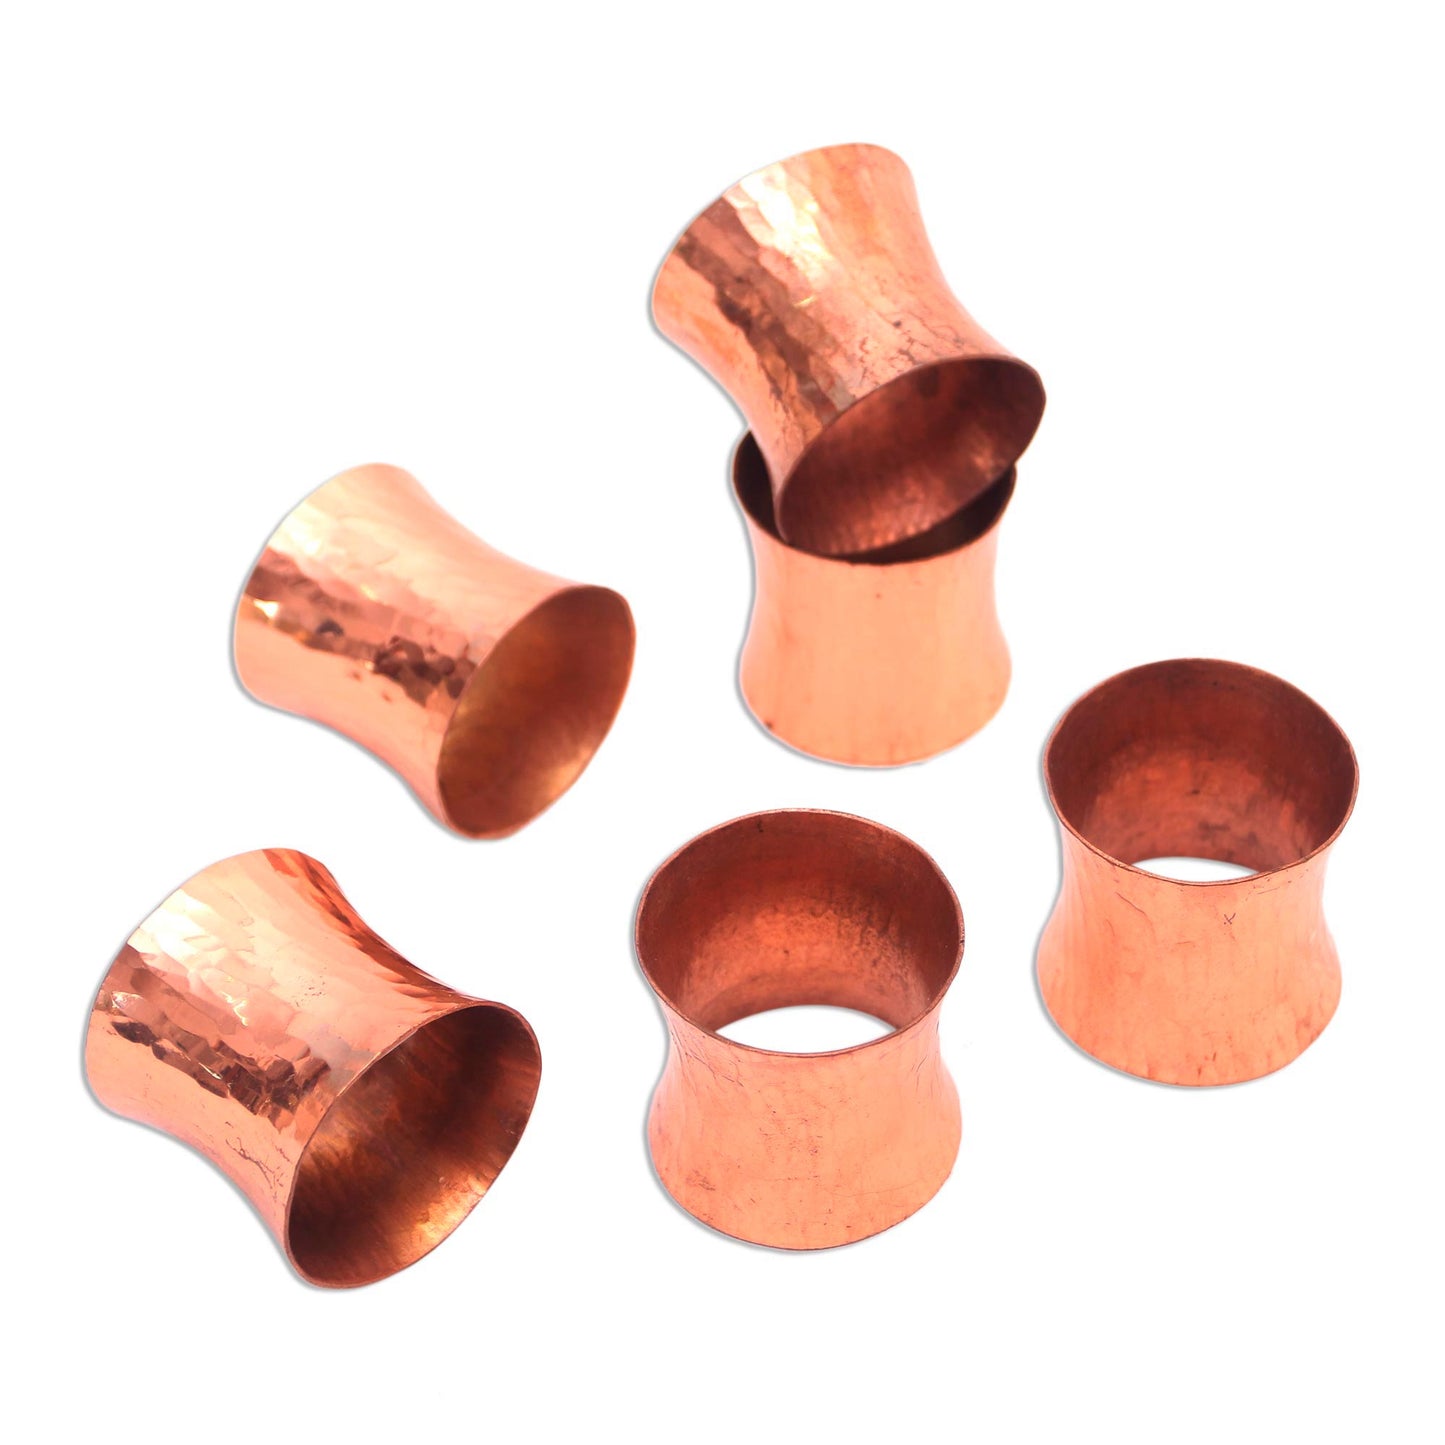 Wonderful Gleam Hammered Copper Napkin Rings from Java (Set of 6)